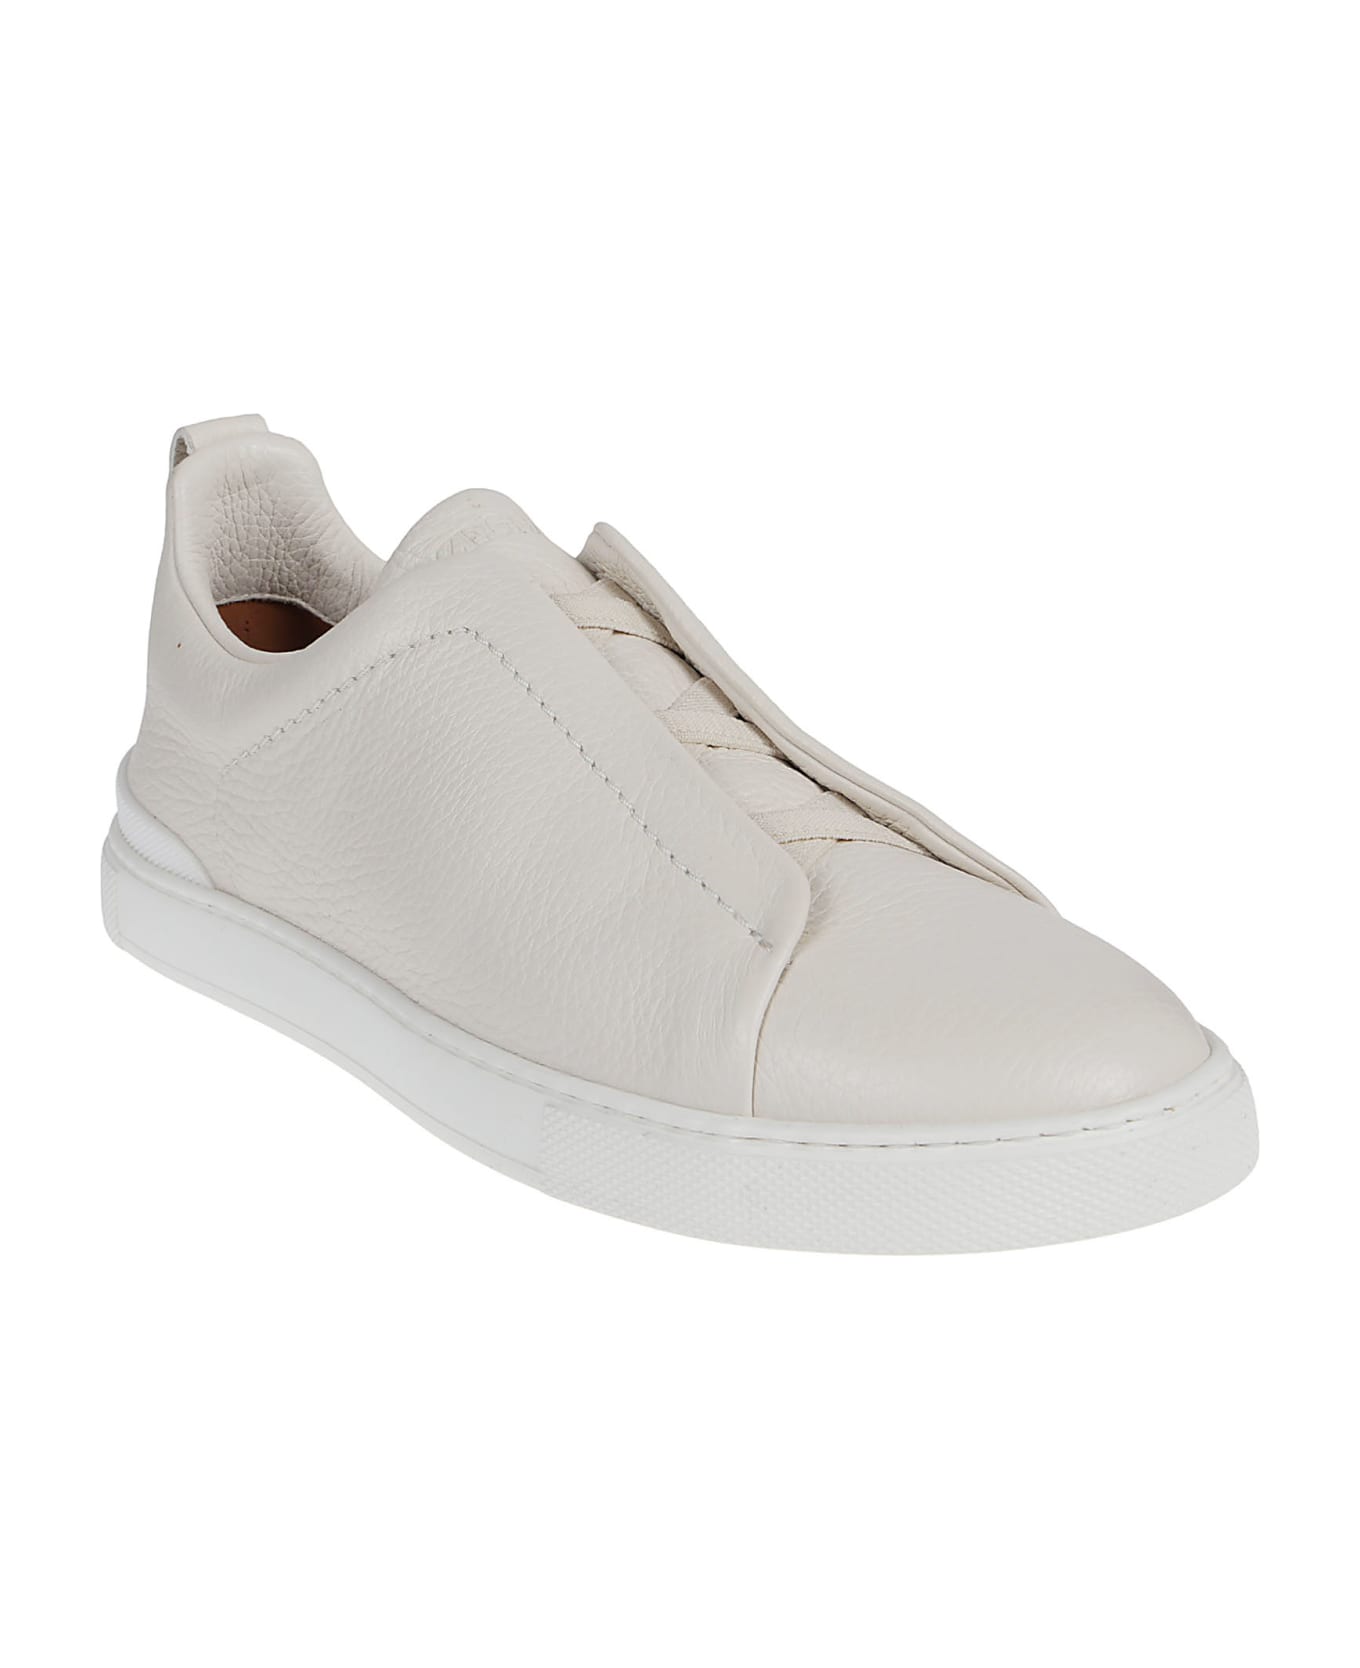 Zegna Triple Stitch Low Top Sneakers - Pan Crema スニーカー